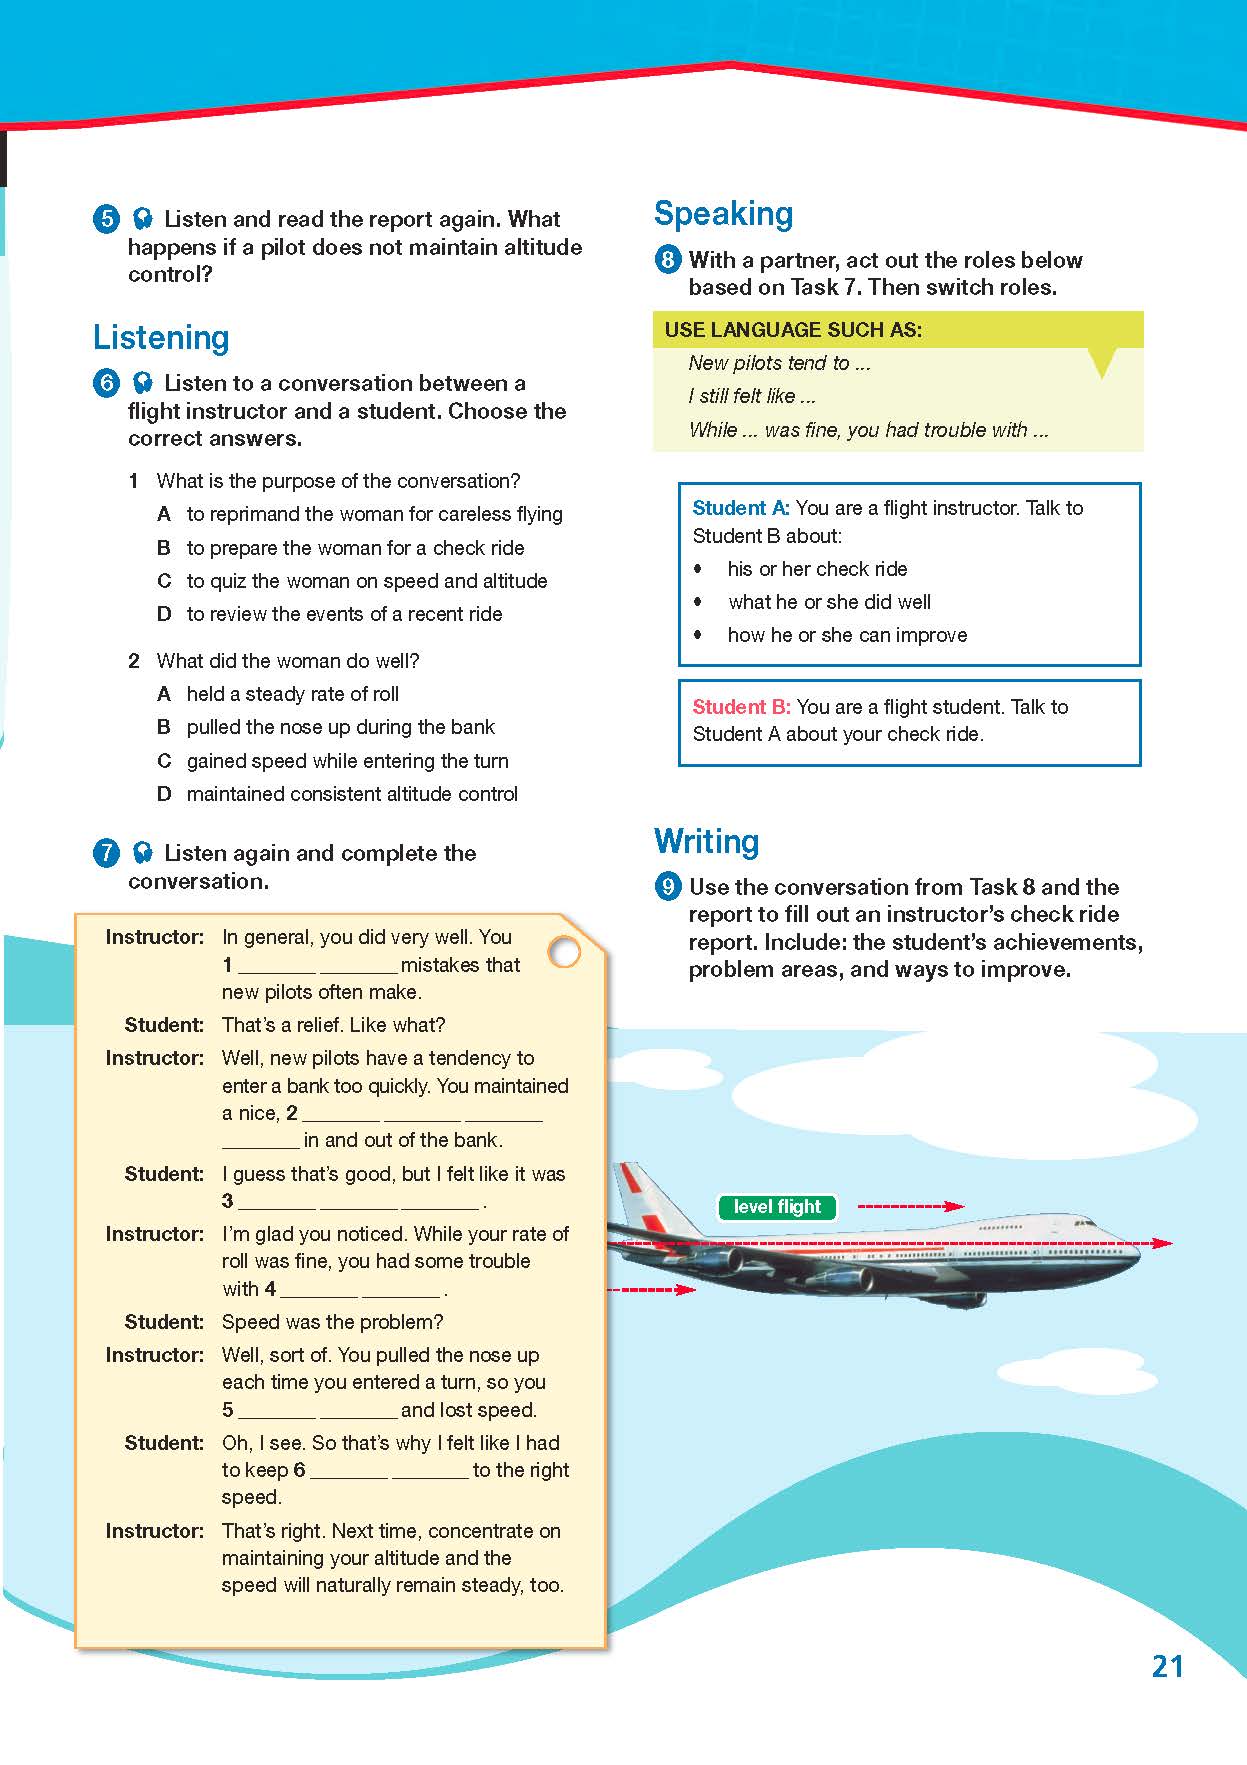 ESP English for Specific Purposes - Career Paths: Civil Aviation - Sample Page 4